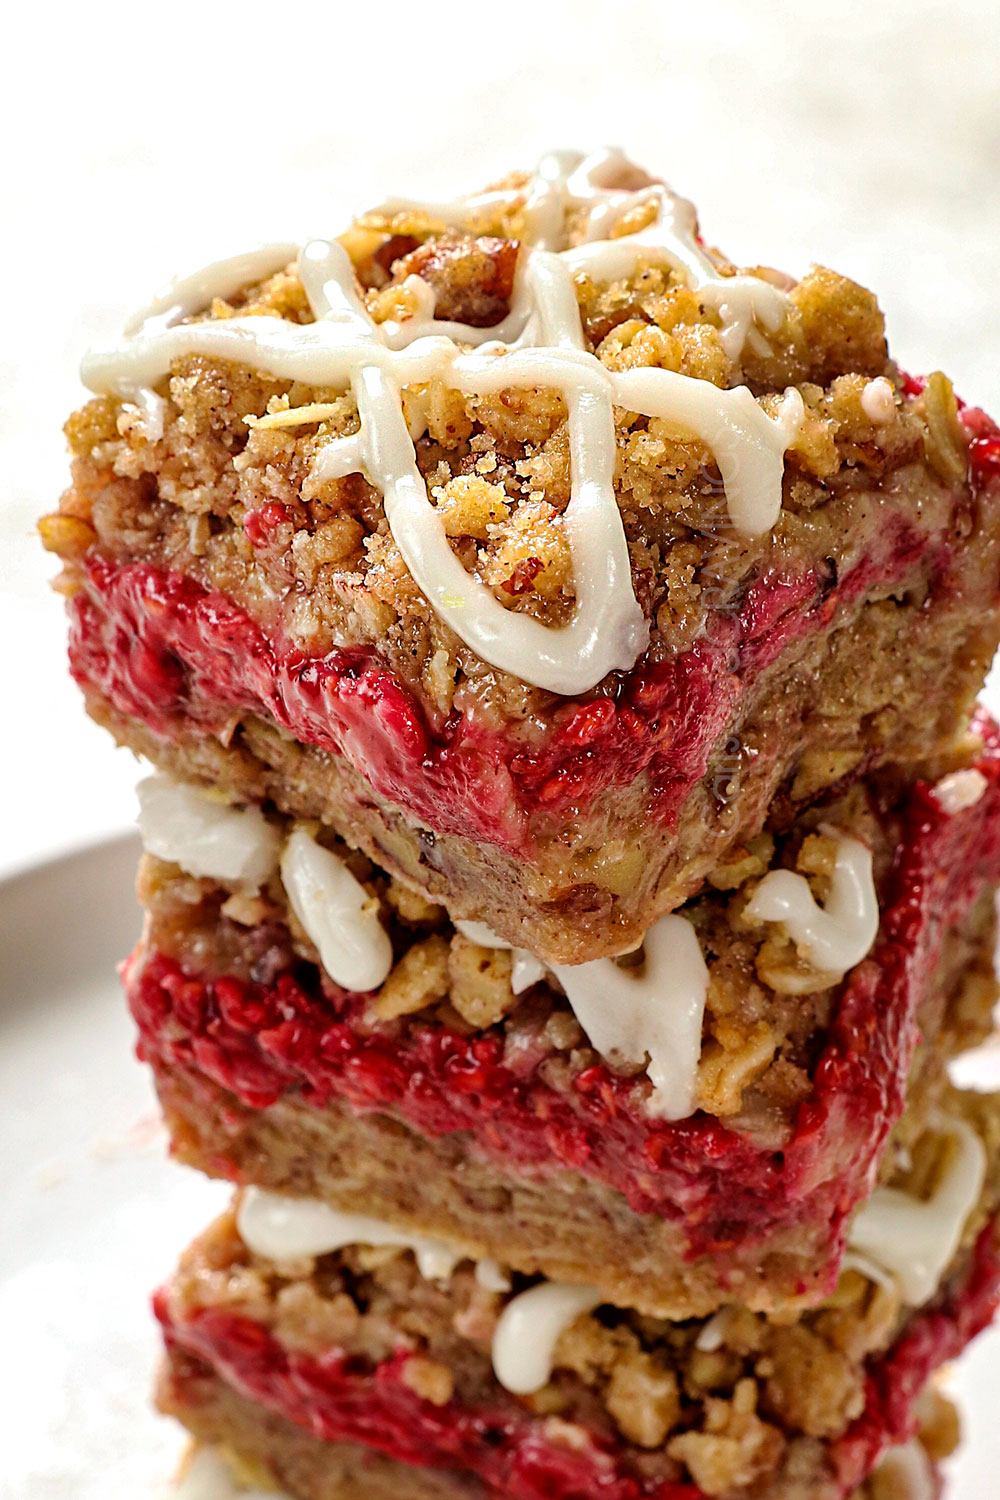 up closer of raspberry crumble bars with oatmeal showing the crispy topping